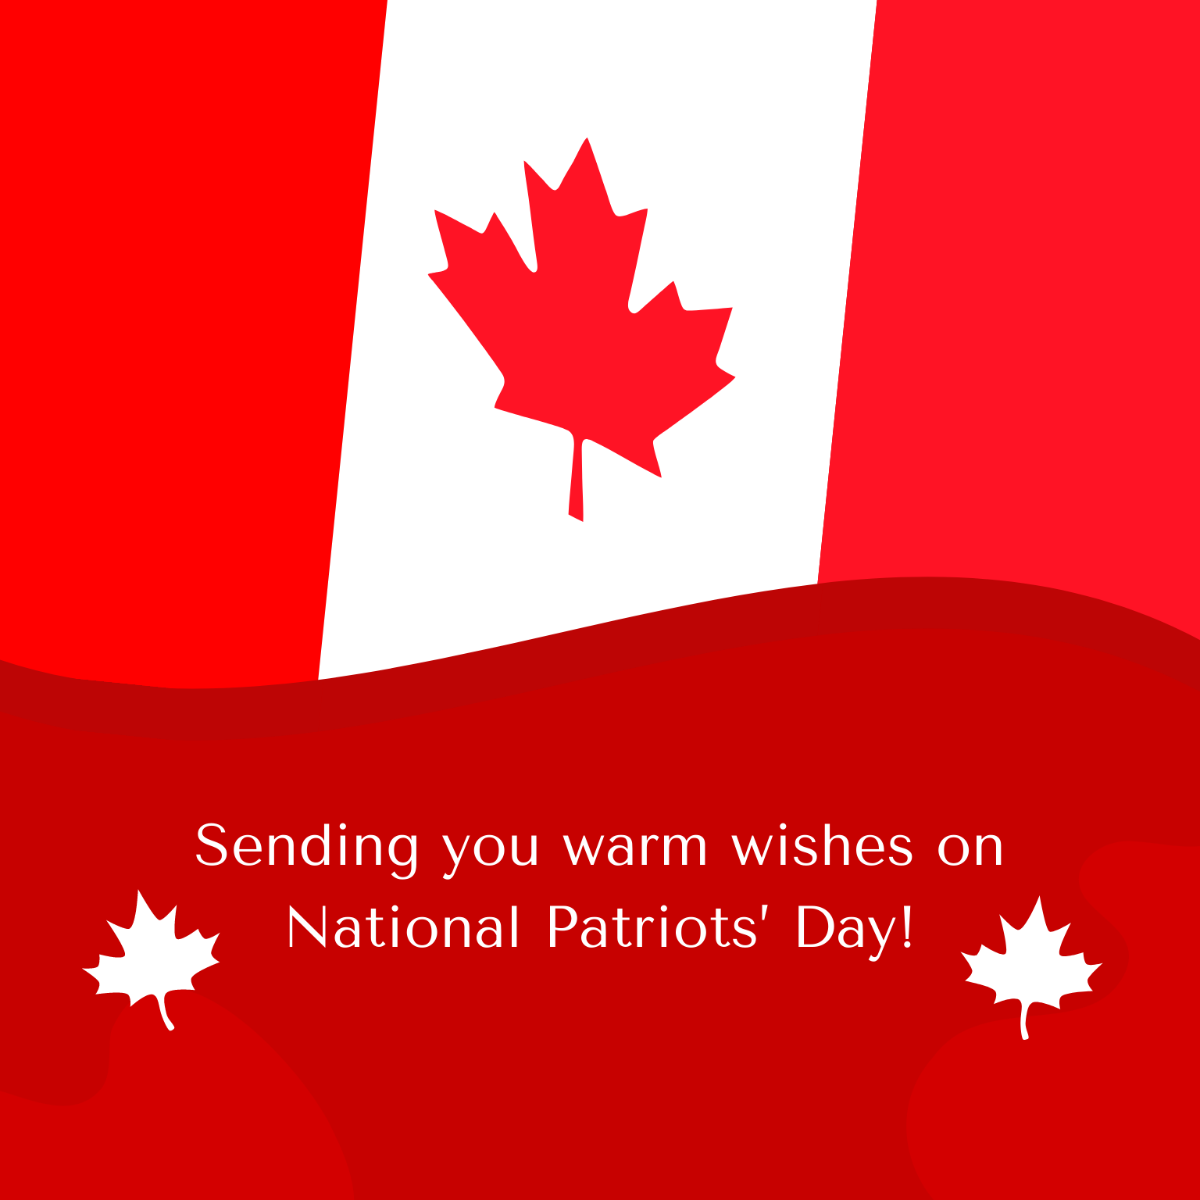 National Patriots' Day Wishes Vector